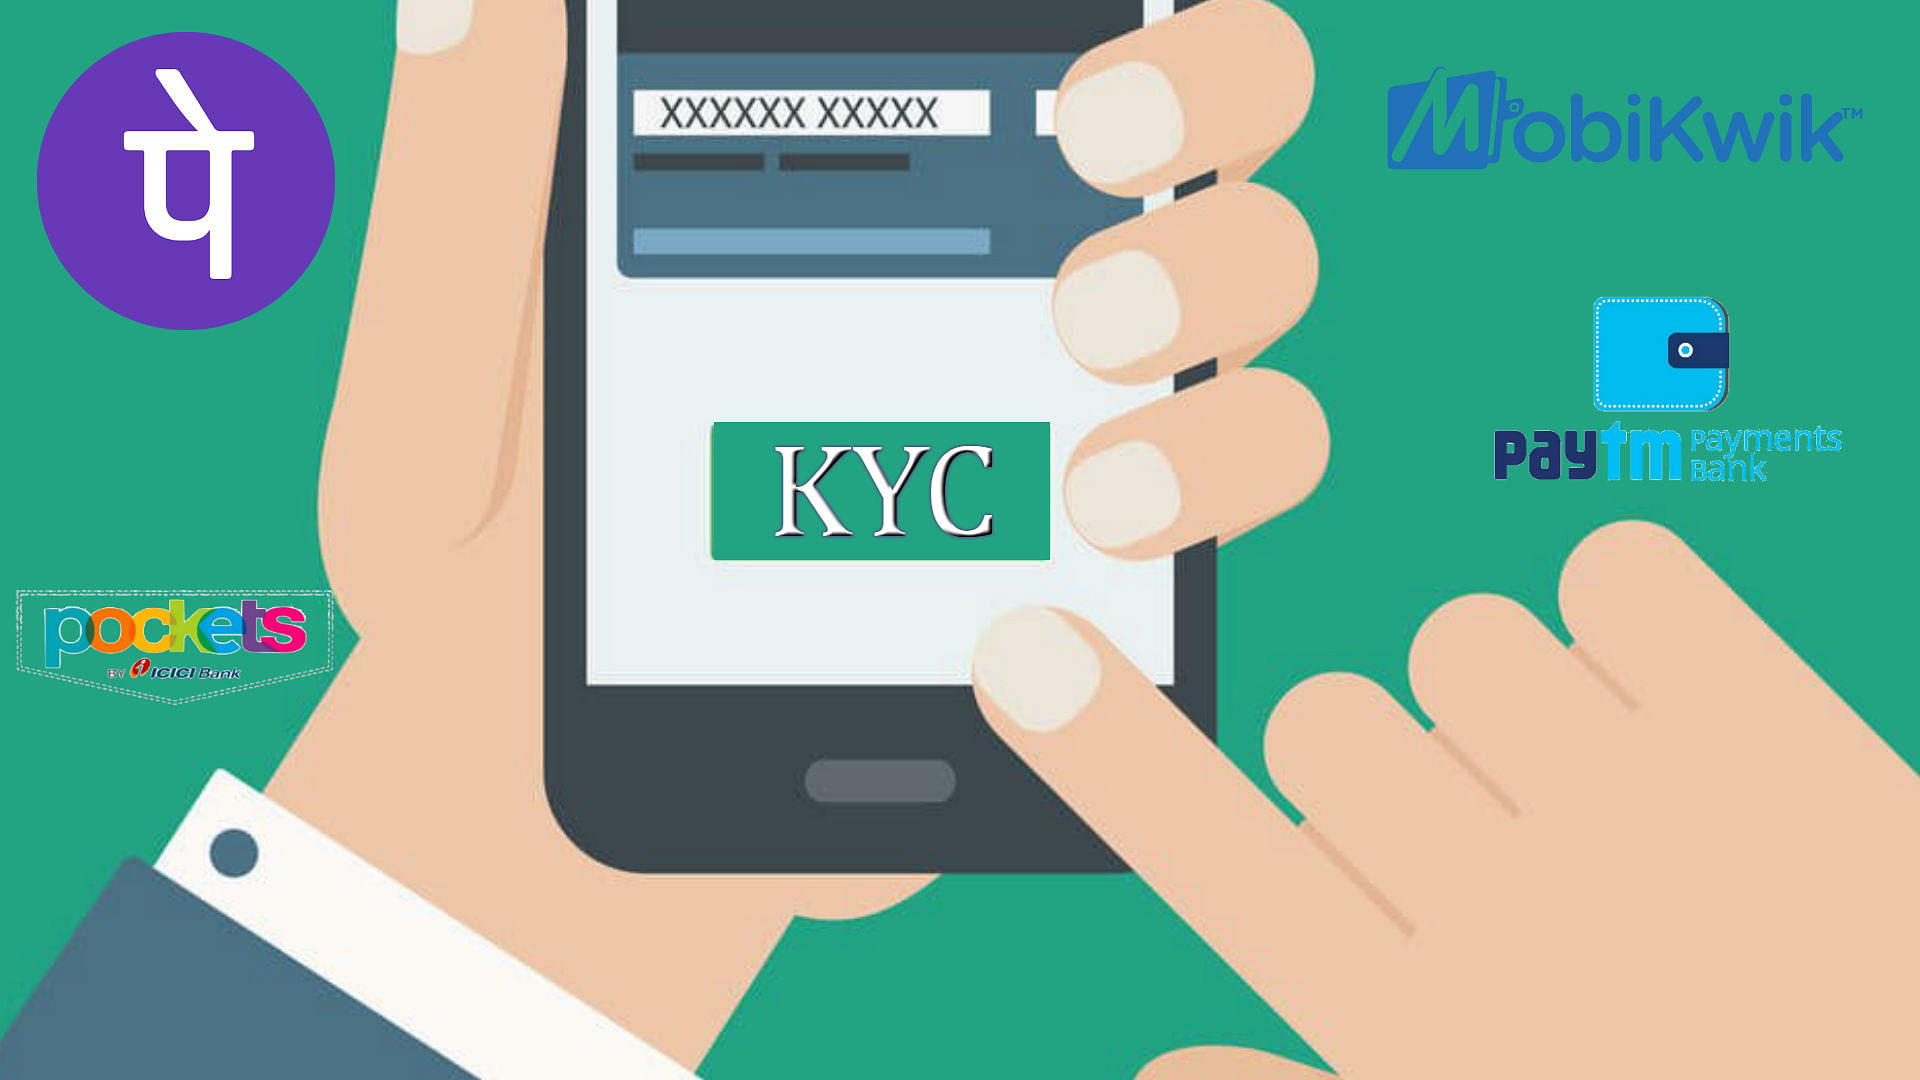 eKYC for mobile wallet was mandated by RBI earlier this year.